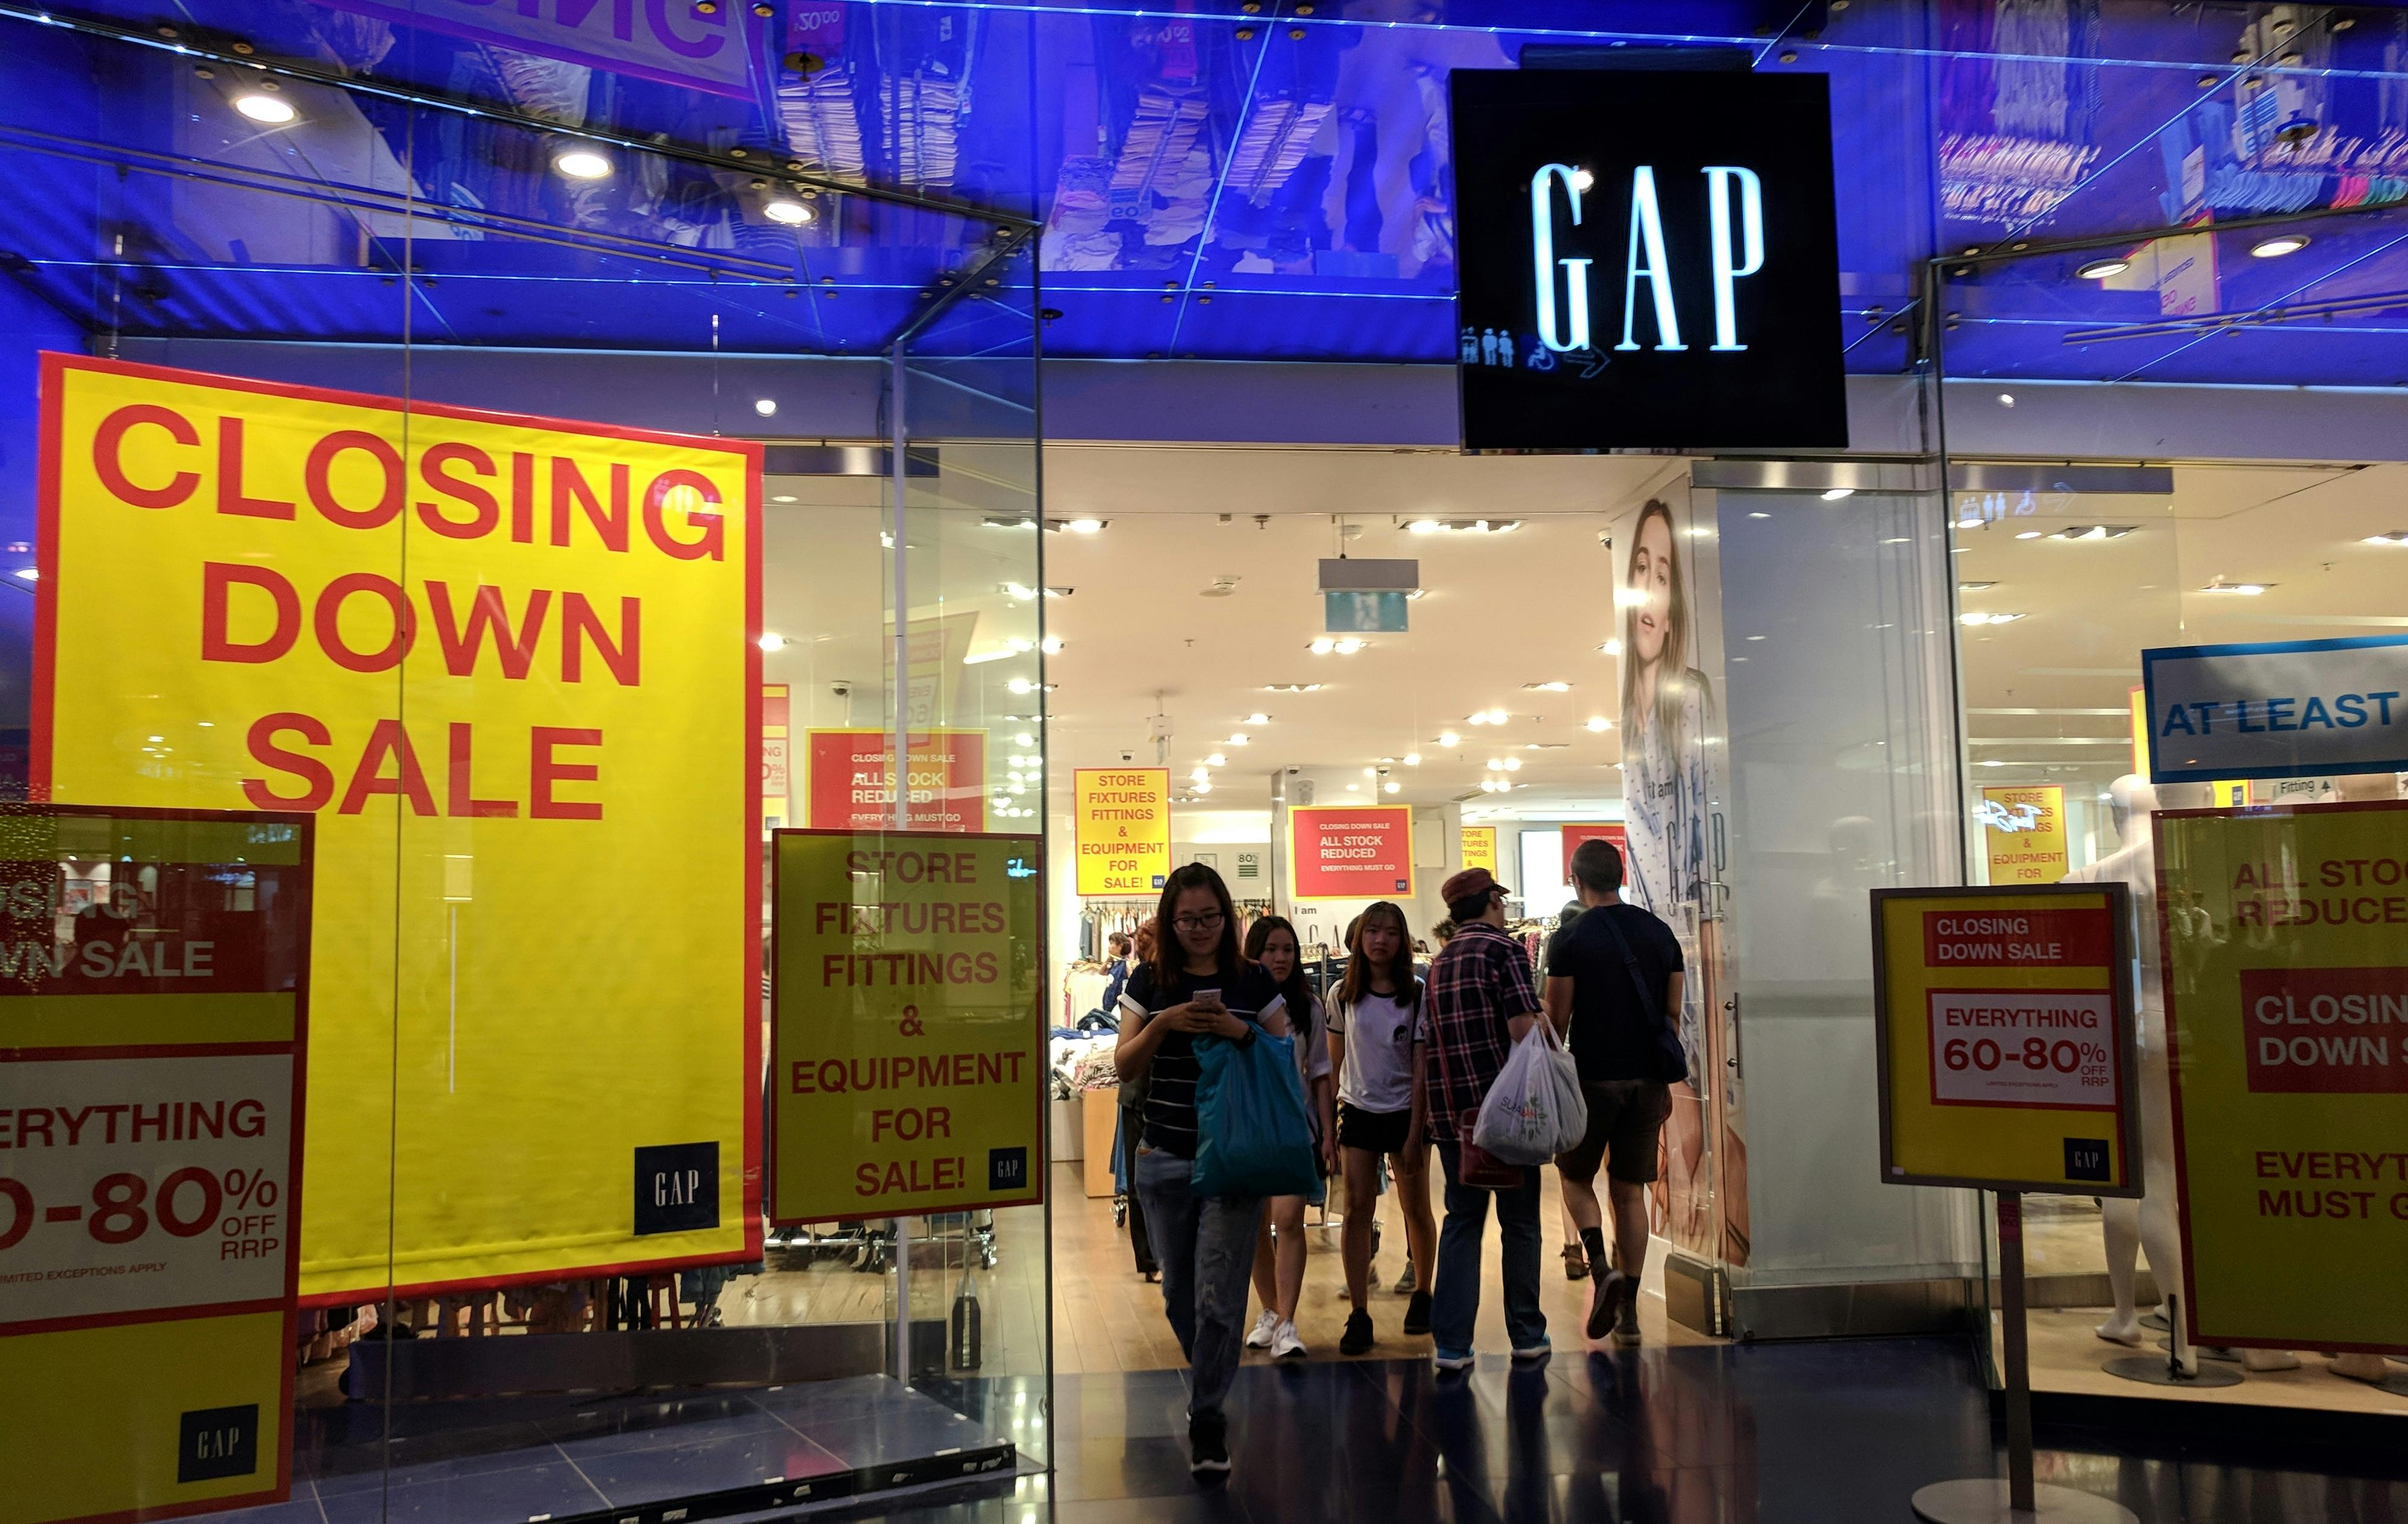 Gap store with "Closing Down Sale" signs in the window.